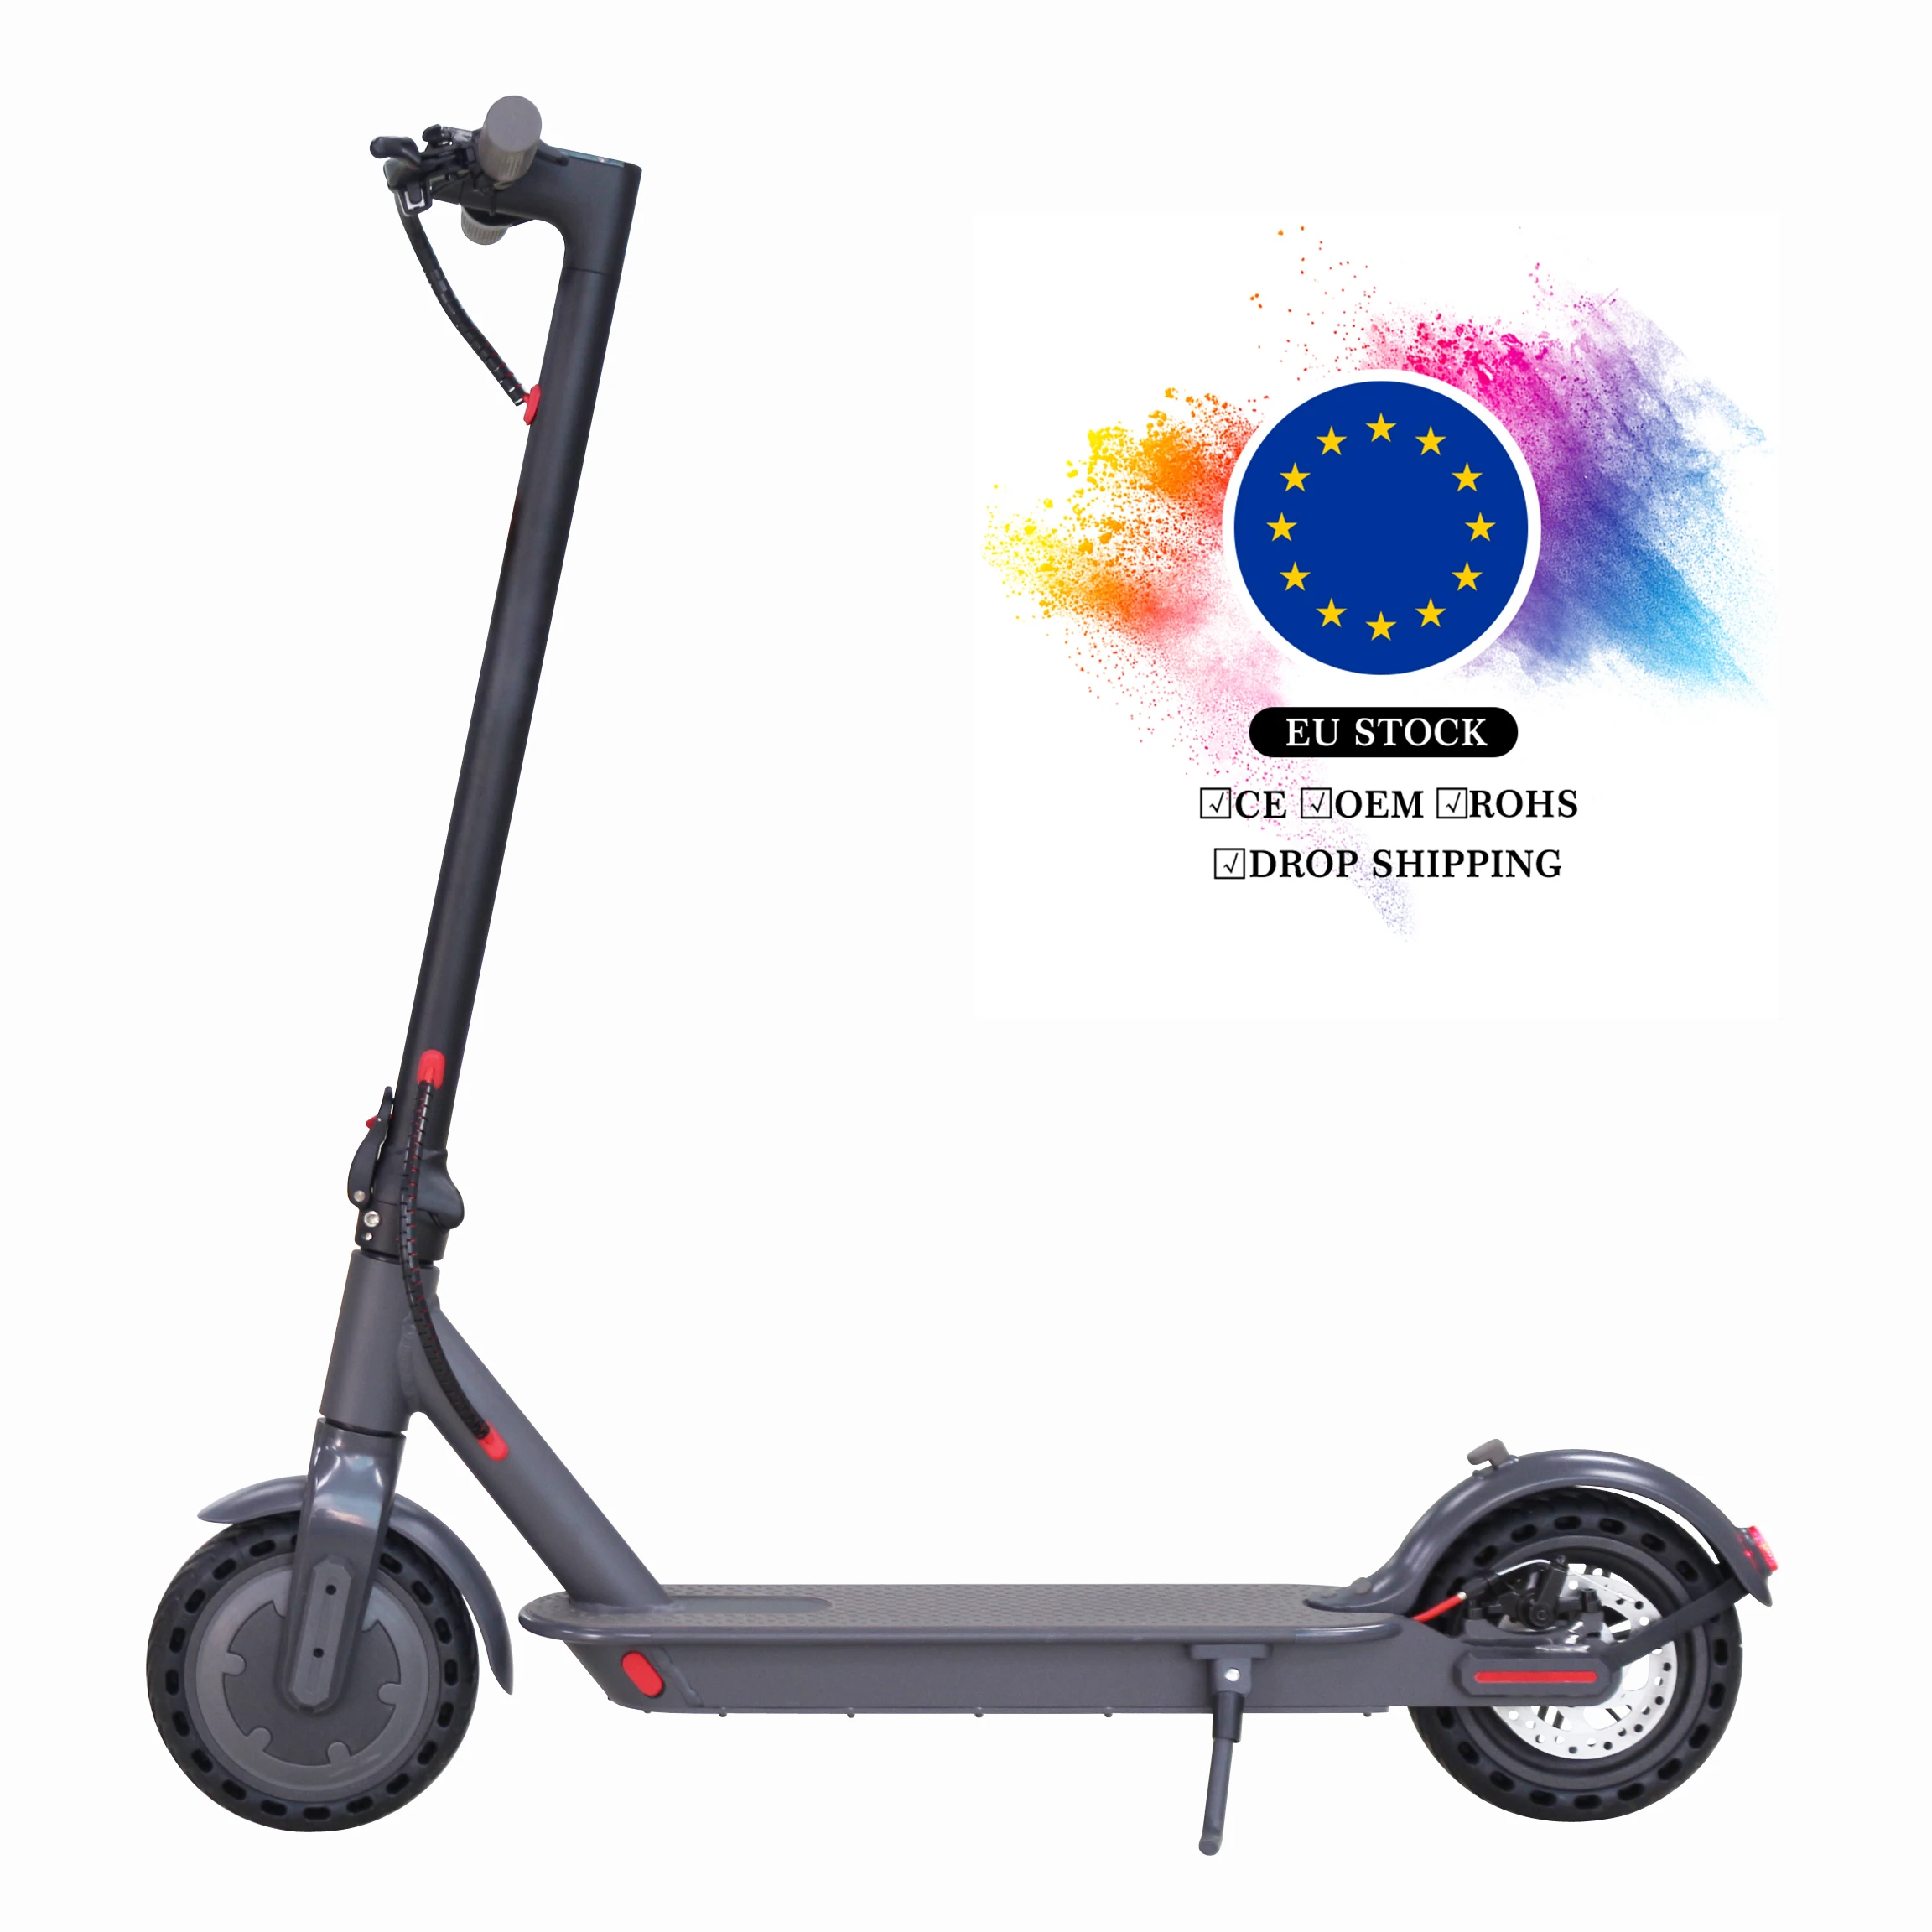 

A3 Waterproof Eu Warehouse 8.5 Inch Kids 350W Mobility Fast Off Road Foldable Adult Self-Balancing Electric Scooter